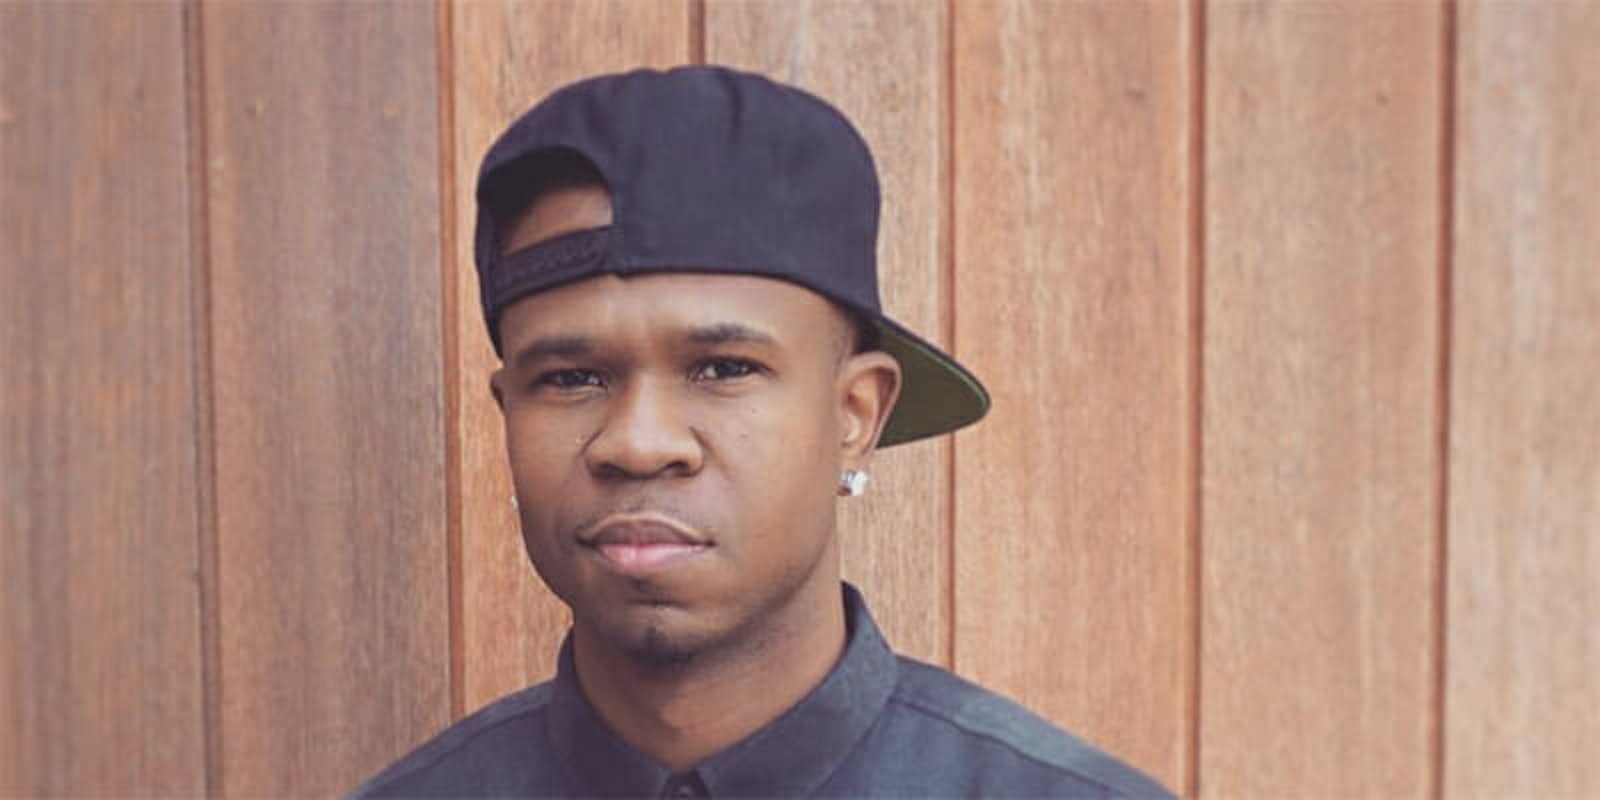 Chamillionaire wants to provide financial support to the family of a man who was deported to Mexico.